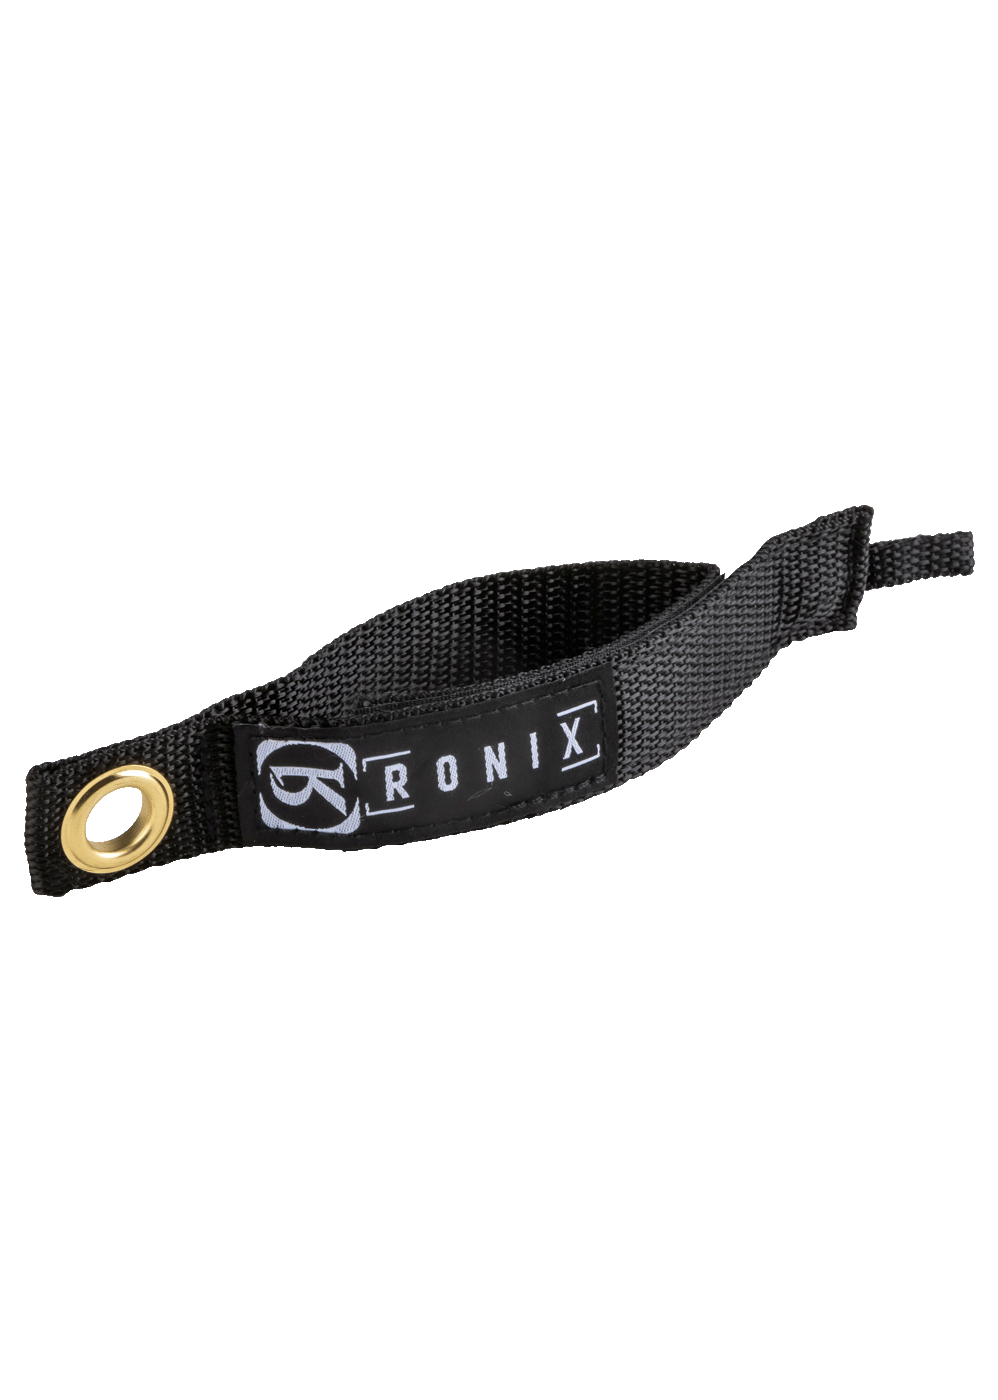 Ronix Rope Caddy Velcro Wrap Up | 25-Pack